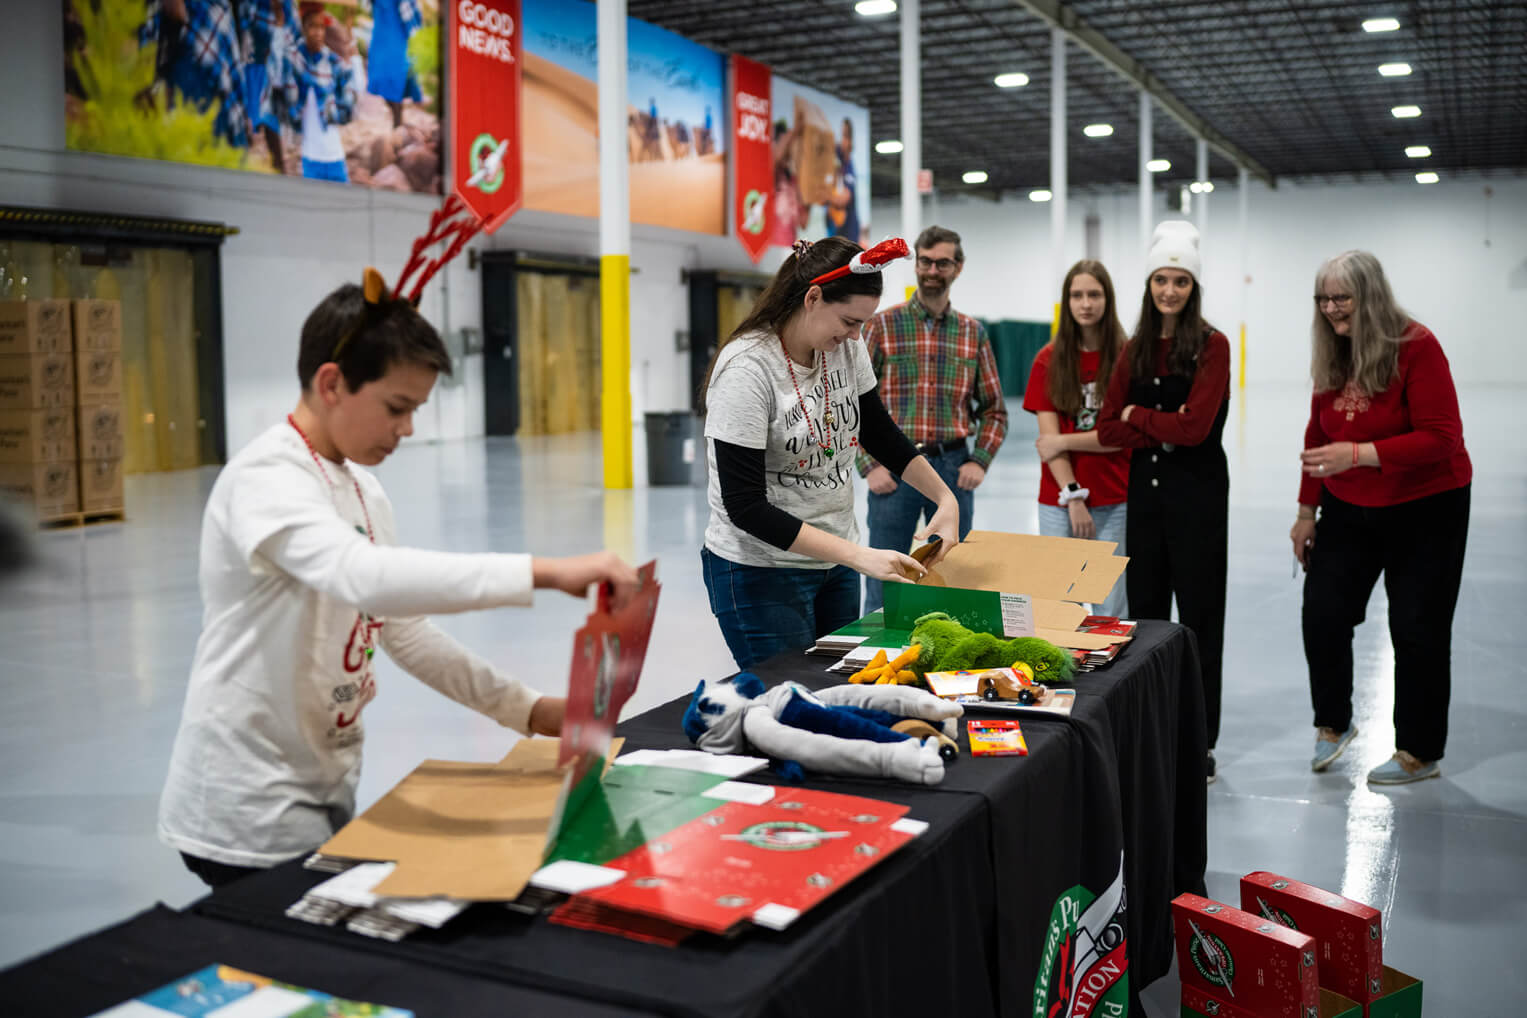 Volunteers enjoy a shoebox packing race during National Collection Week in Chicago.